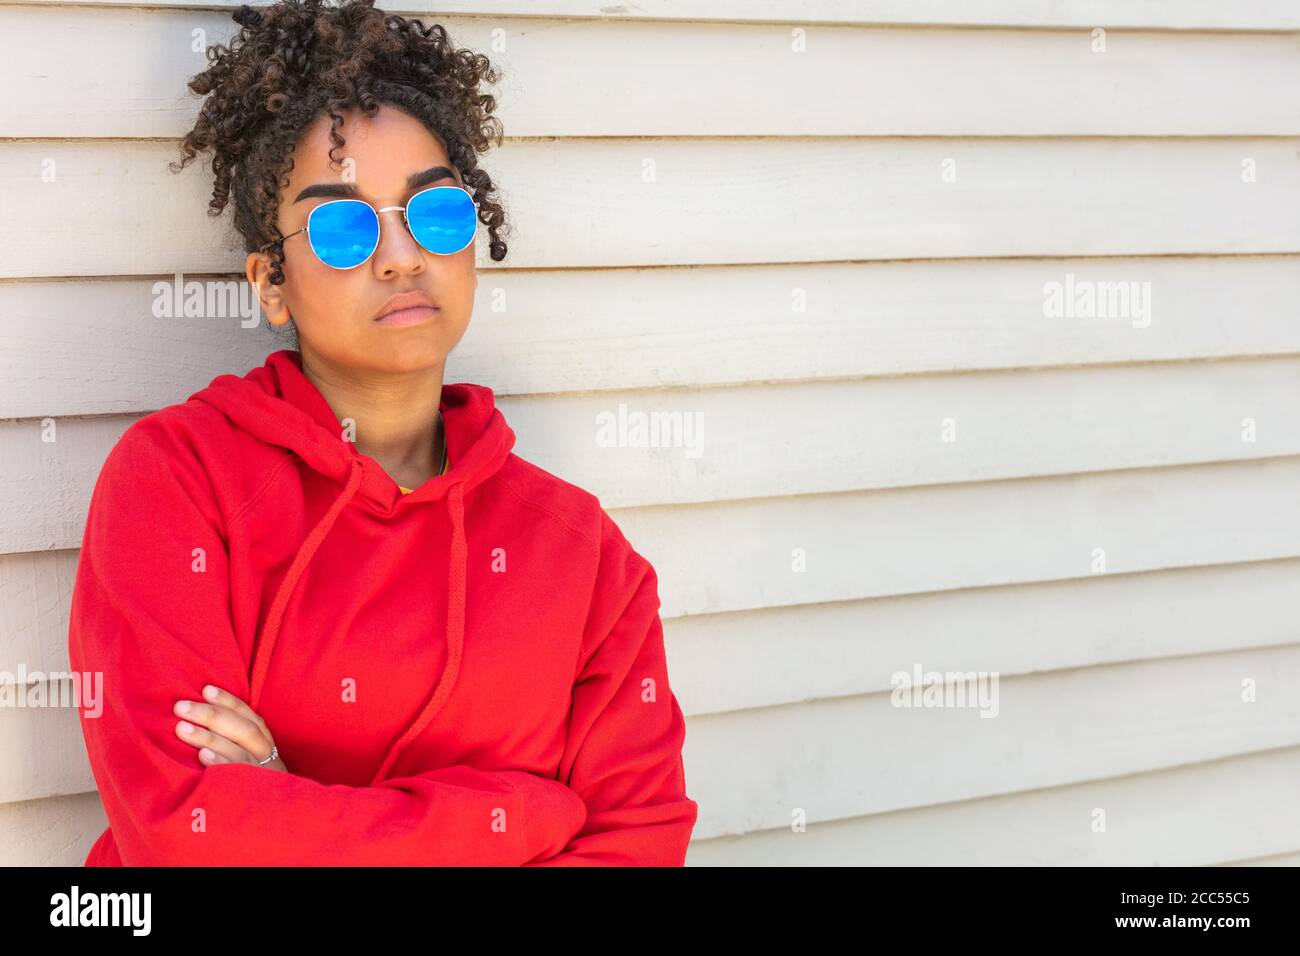 Girl teenager cool teen mixed race biracial African American female young woman wearing blue sunglasses and a red hoodie on vacation in summer sunshin Stock Photo